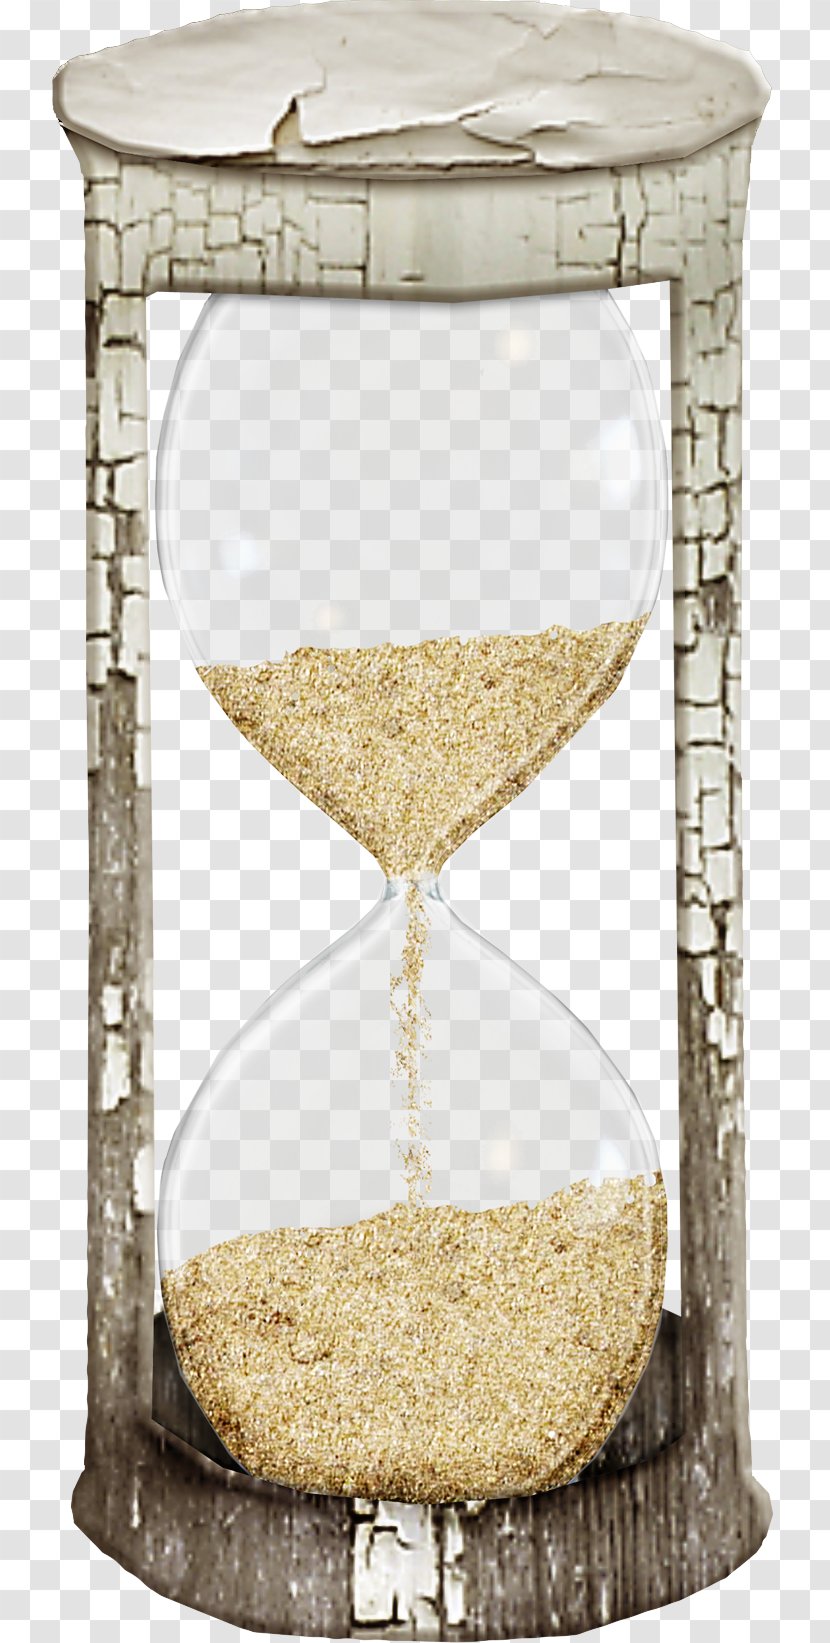 Hourglass Theatrical Scenery Fundal - Background Transparent PNG